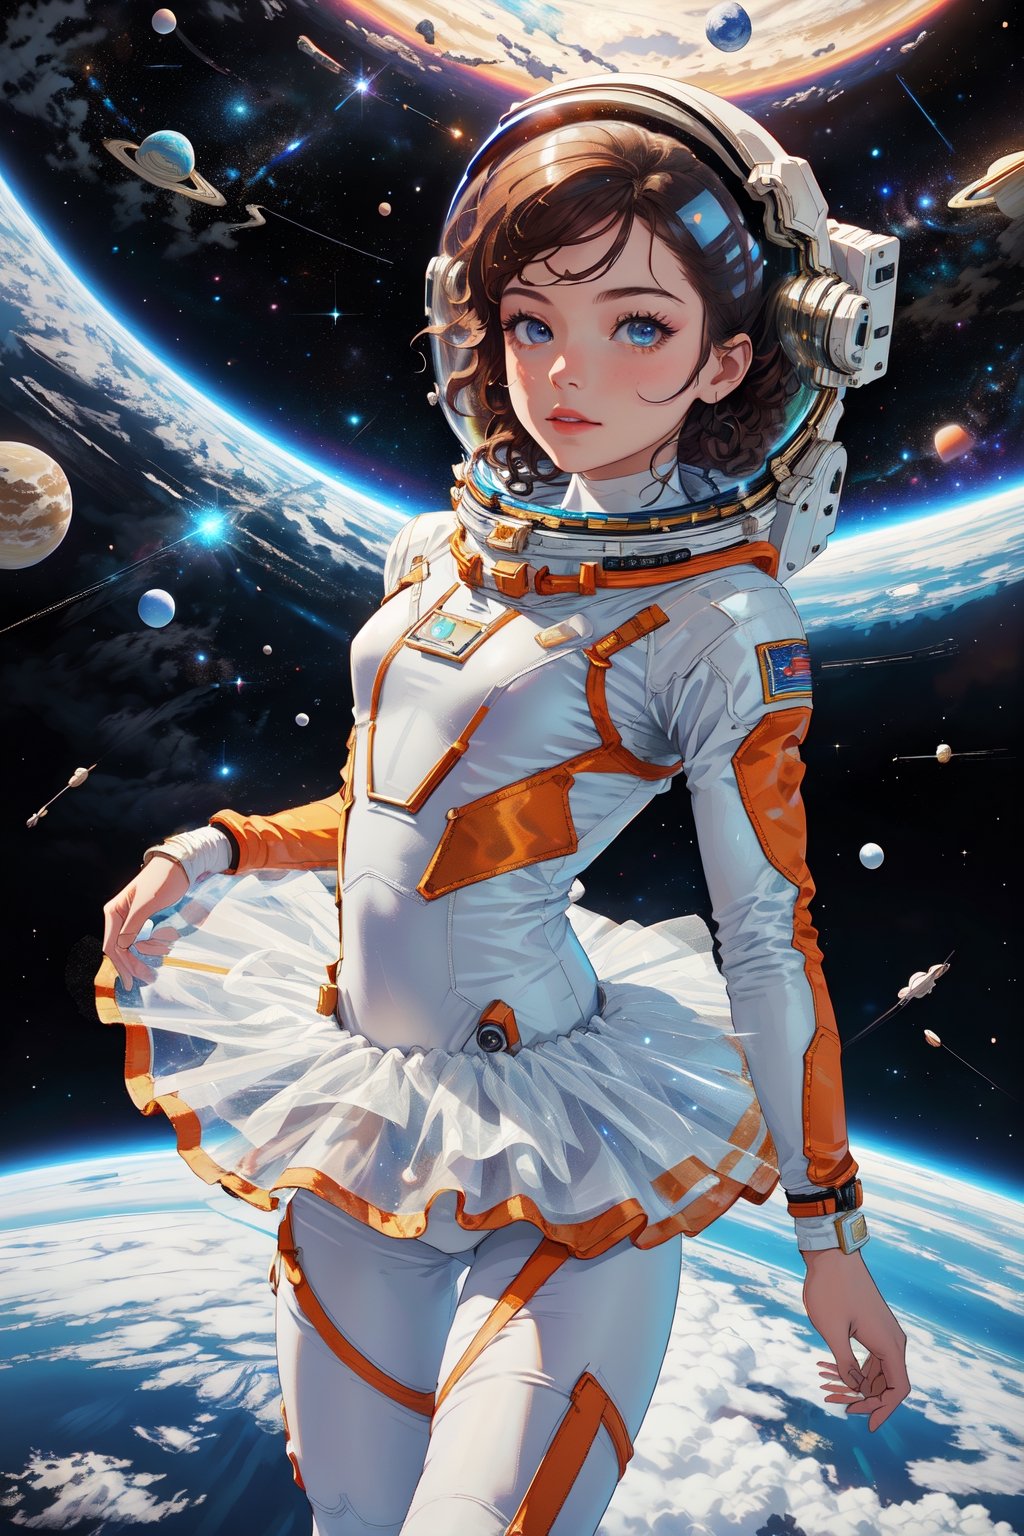 An 18-year-old young ballerina dances in space in a neon tutu and a space helmet, in space involving weightlessness, ballet figure - attitude, stars and Saturn behind her, slim fit physique, ballet tutu with elements of Soviet spacesuits, Soviet space paraphernalia, gloomy and dark atmosphere, retrofuturism, neon,Ballet_tutu,highres,bing_astronaut,Futuristic room